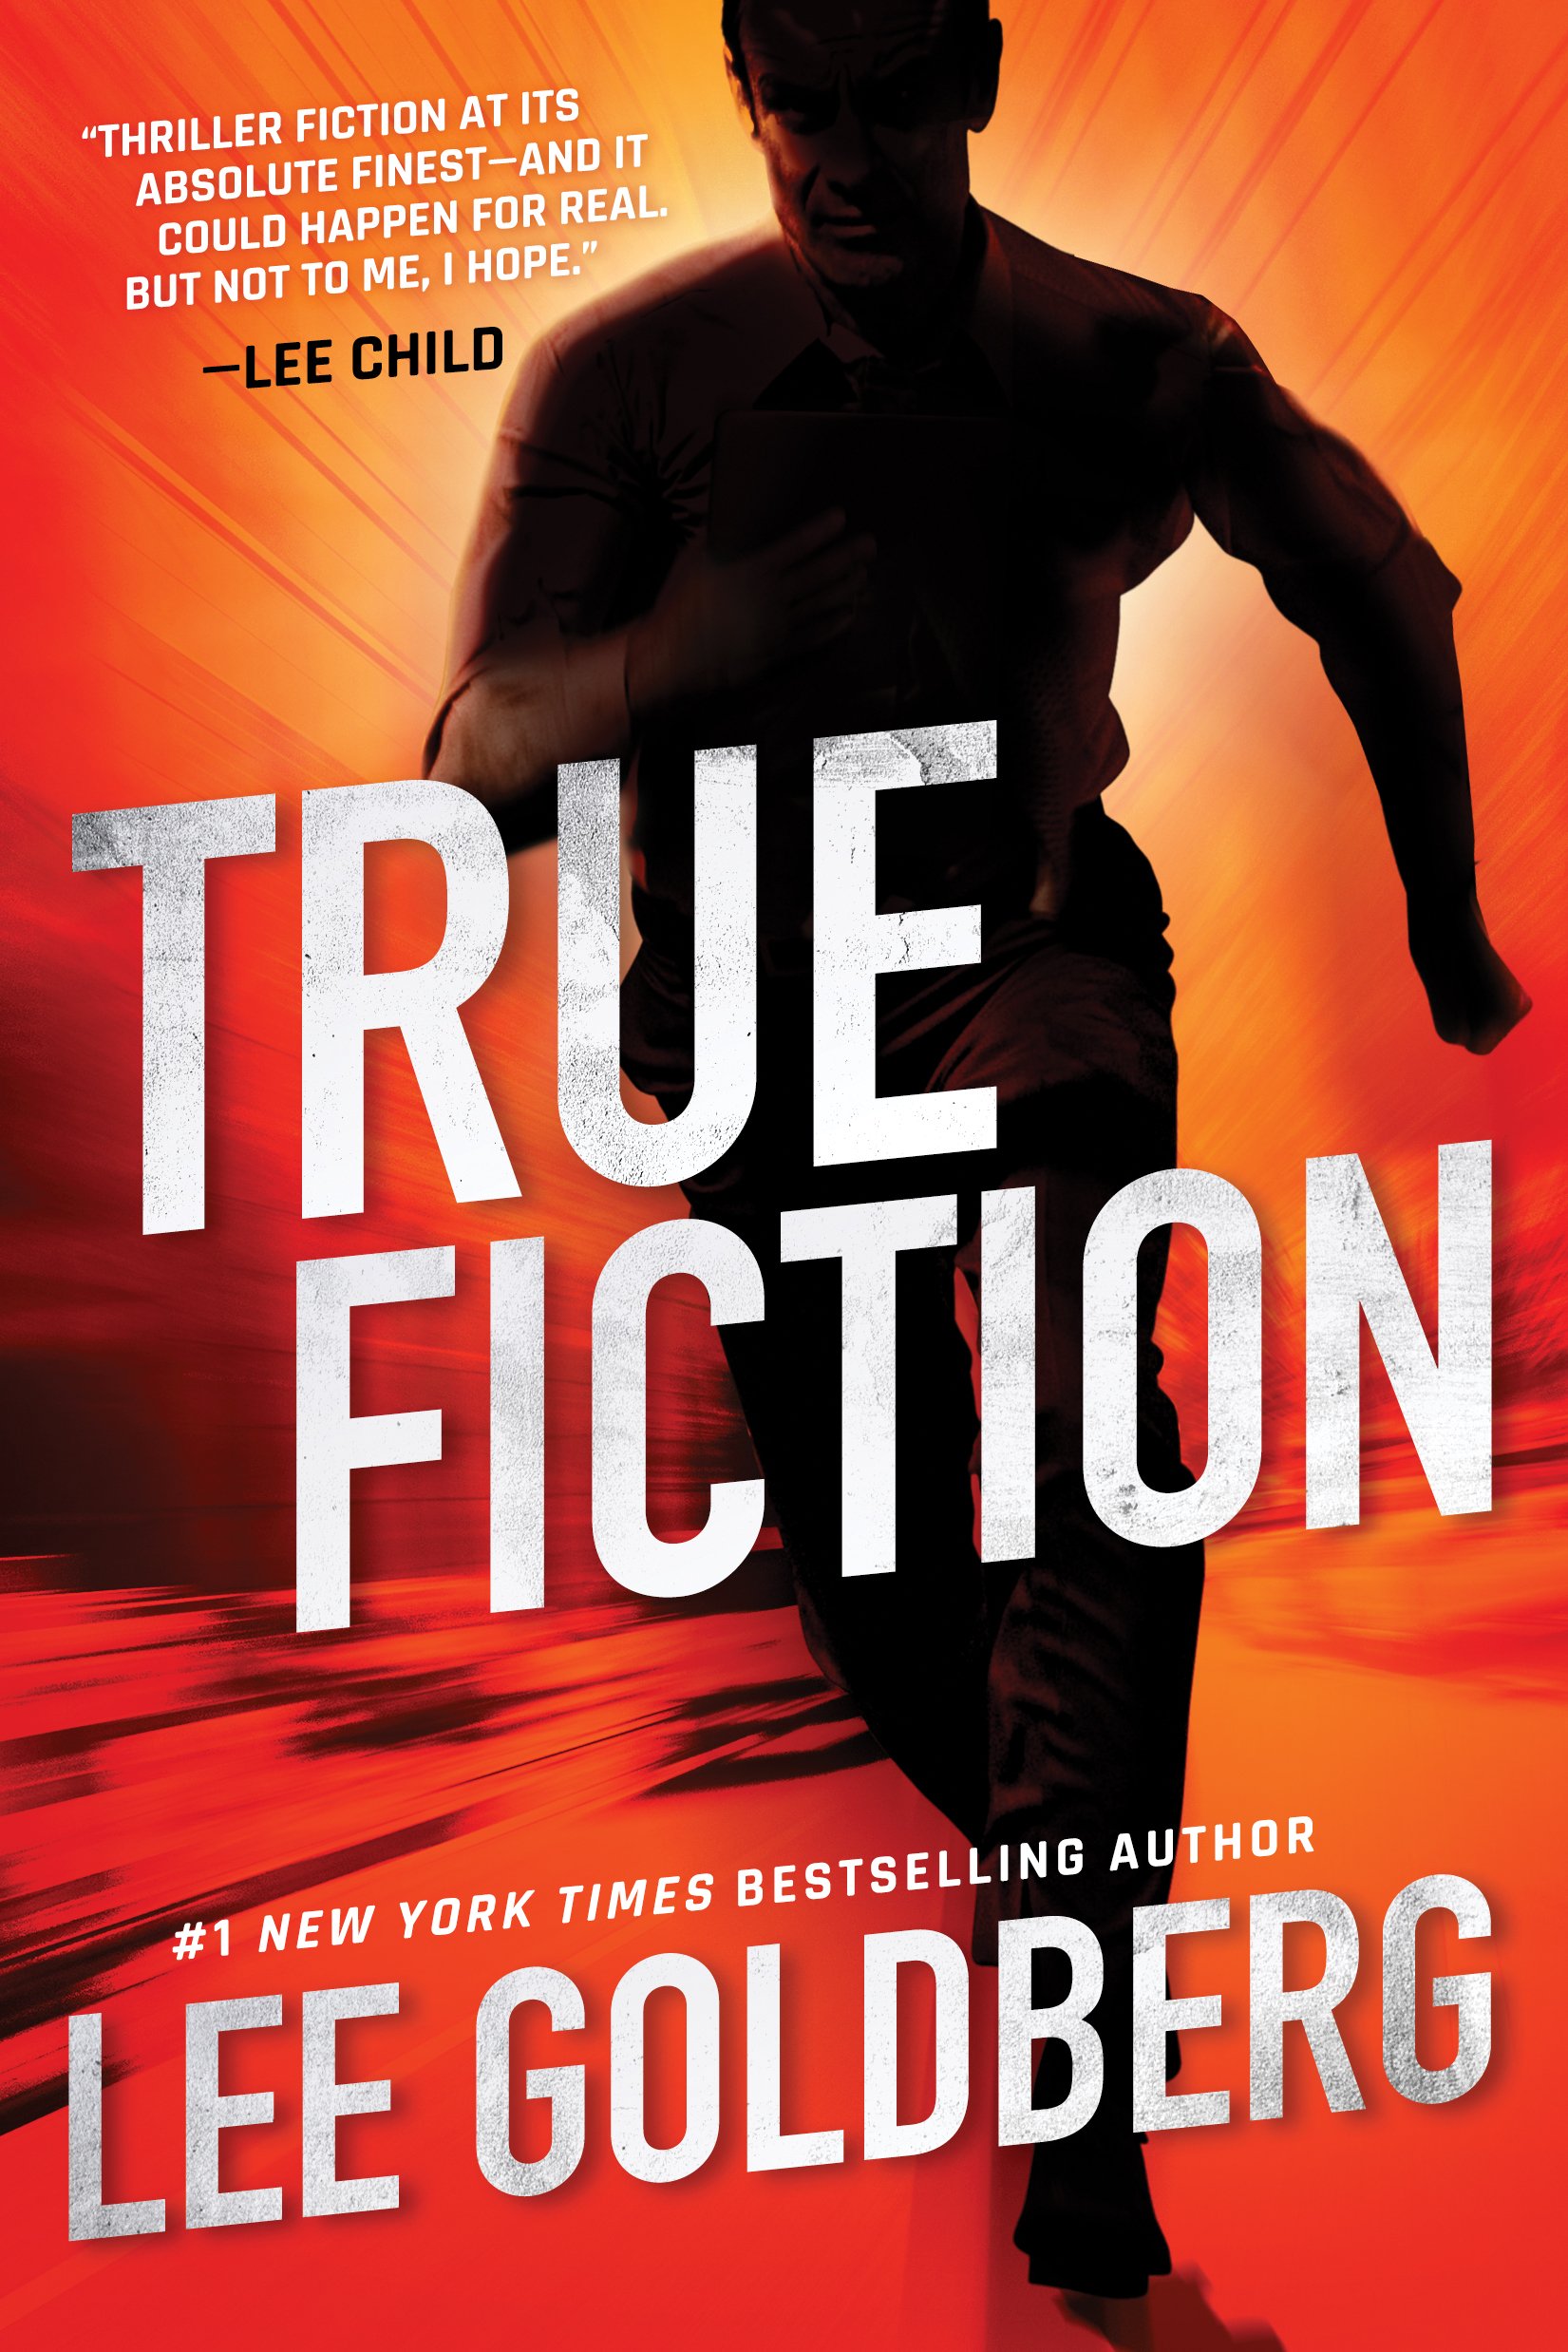 Image for "True Fiction"